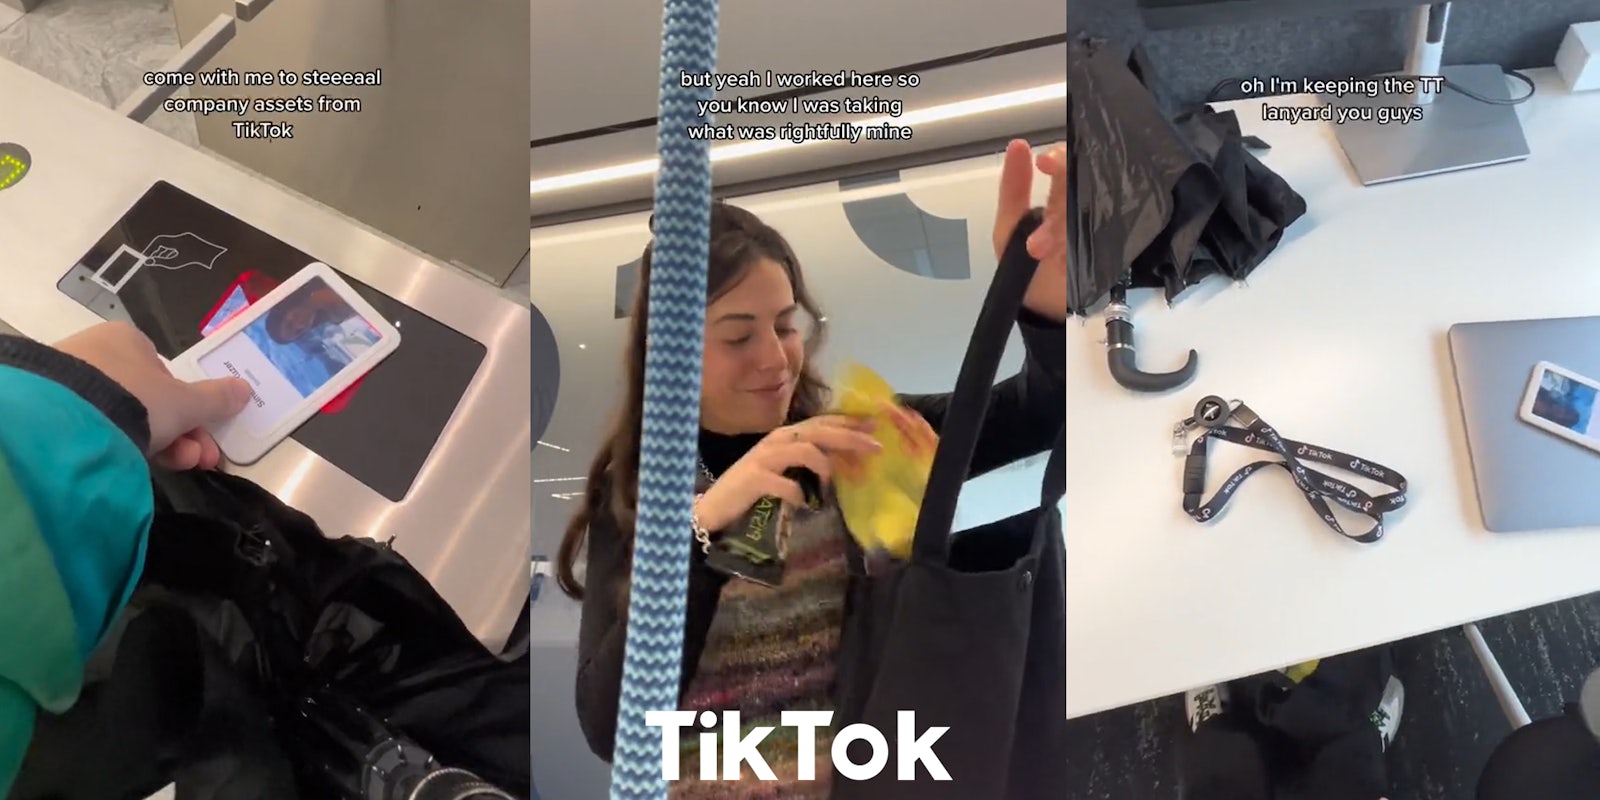 former TikTok employee scanning ID with caption 'come with me to steeeeaal company assets from TikTok' (l) former TikTok employee taking snacks with caption 'but yeah I worked here so you know I was taking what was rightfully mine' with TikTok logo at bottom (c) TikTok worker desk with lanyard with caption 'oh I'm keeping the TT lanyard you guys' (r)